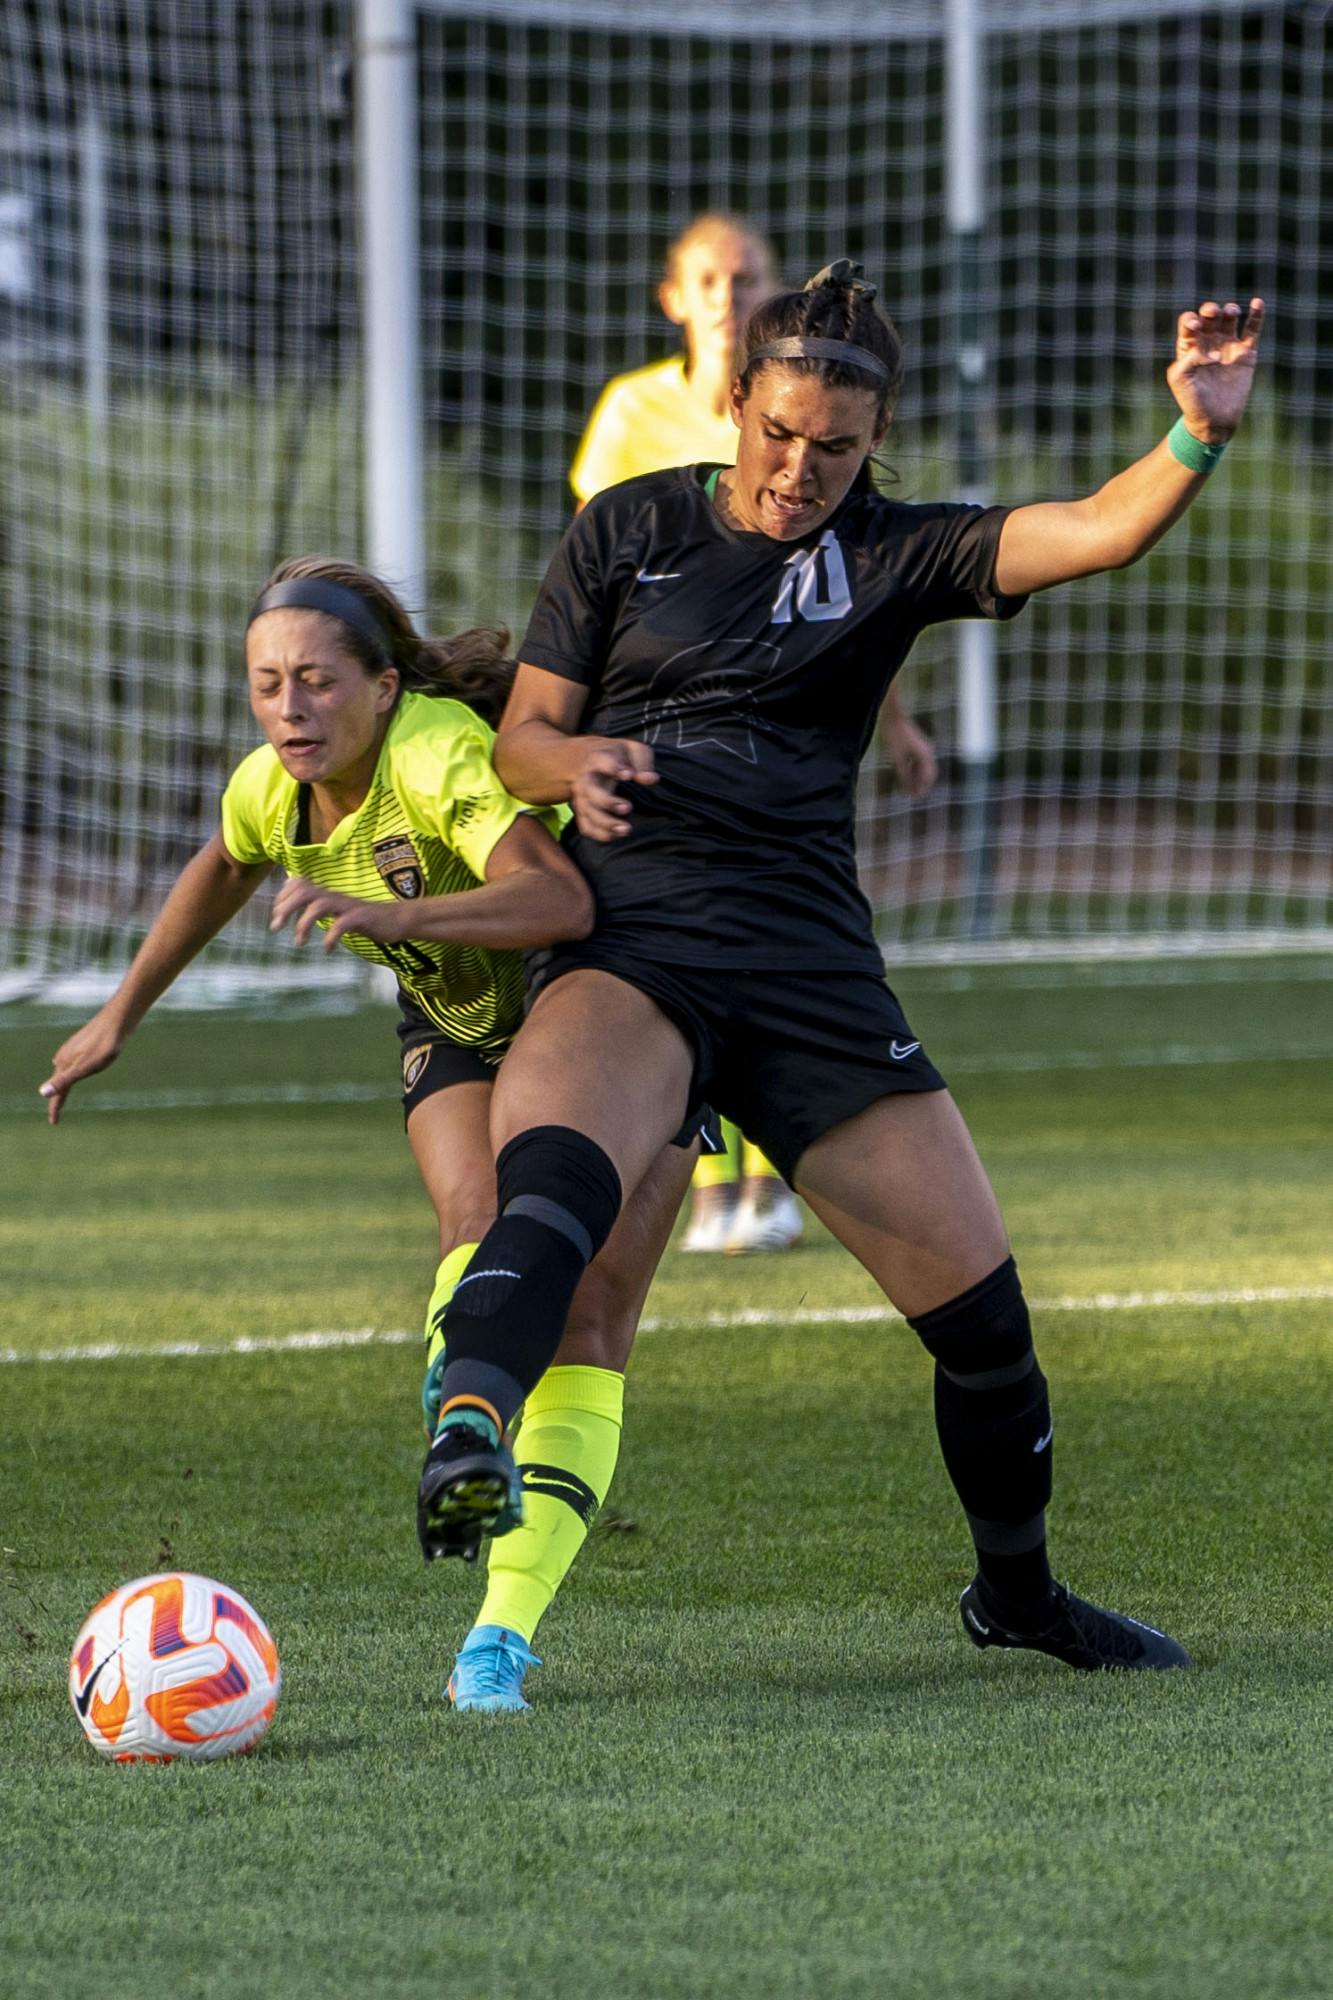 <p>Graduate level forward Camryn Evans (10) and Oakland’s Sydney Grodsinsky (15) face off during a MSU and Oakland women’s soccer game at DeMartin Field in East Lansing on Sept. 8, 2022. The Spartans and Grizzlies tied, 0-0.</p>